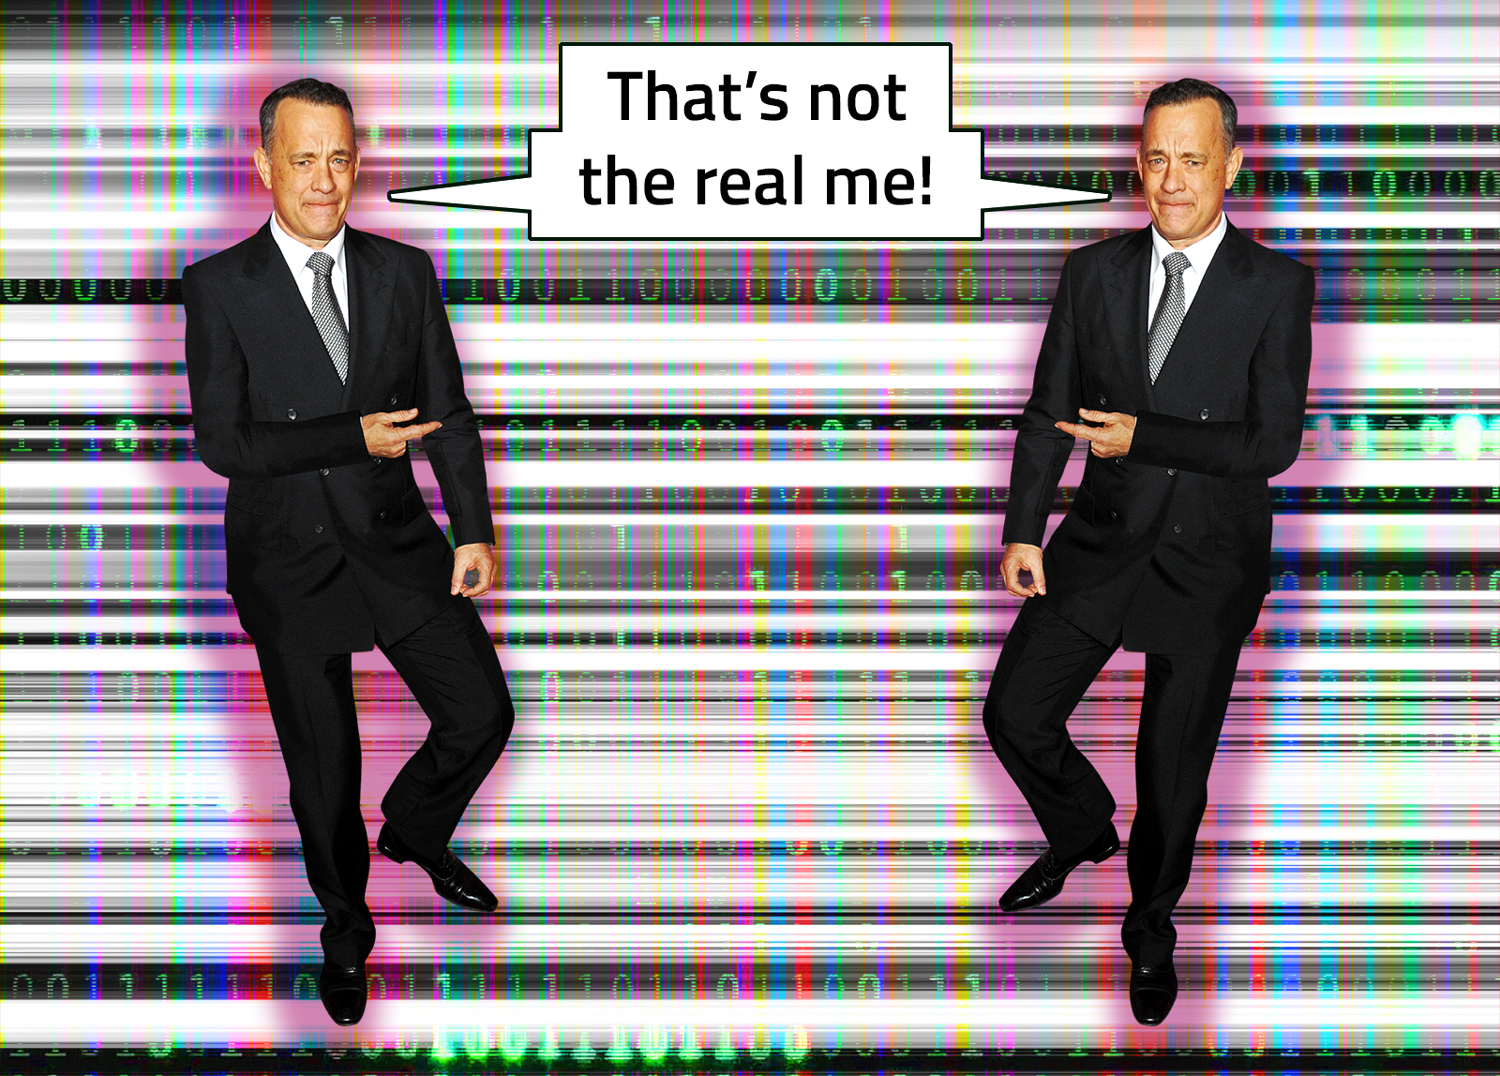 Tom Hanks pointing to a deepfake of himself, with each Hanks claim the other isn’t real.